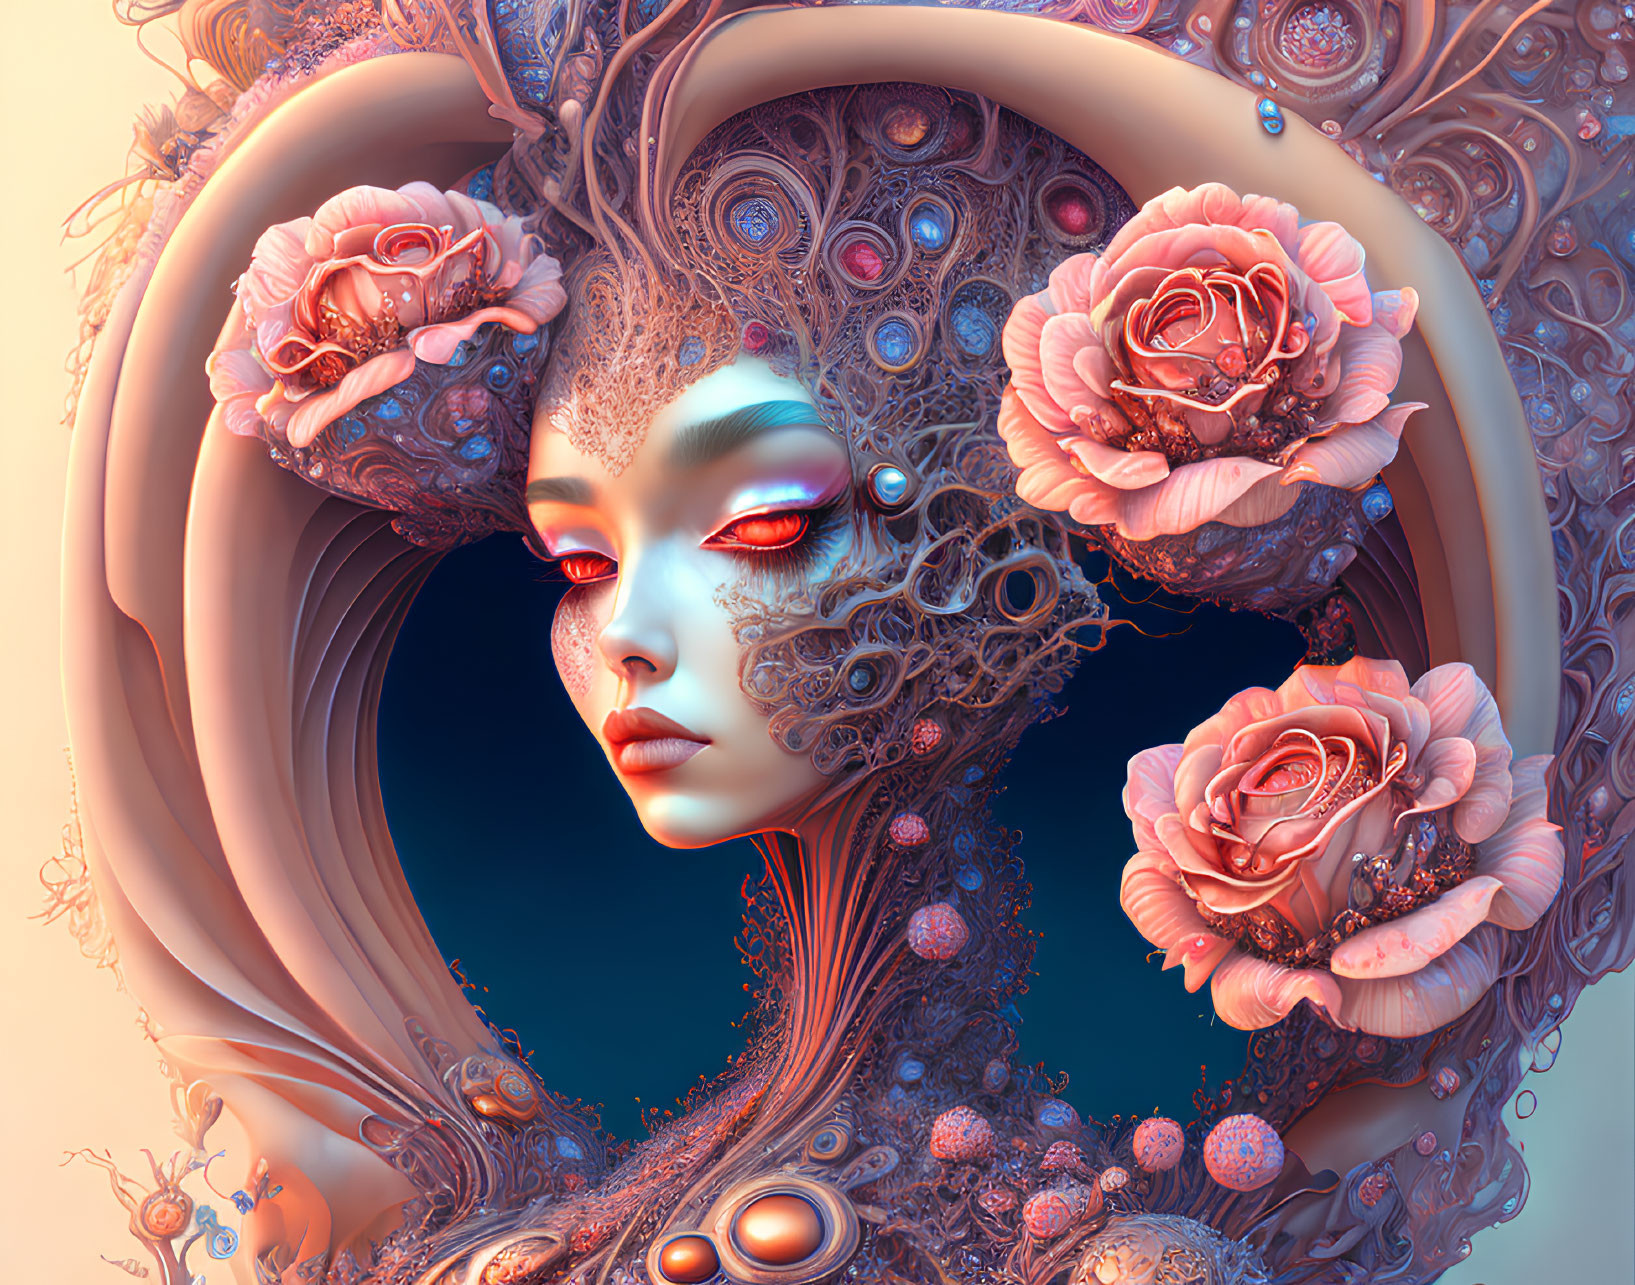 Surreal digital artwork: humanoid figure with floral headdress, intricate lace patterns